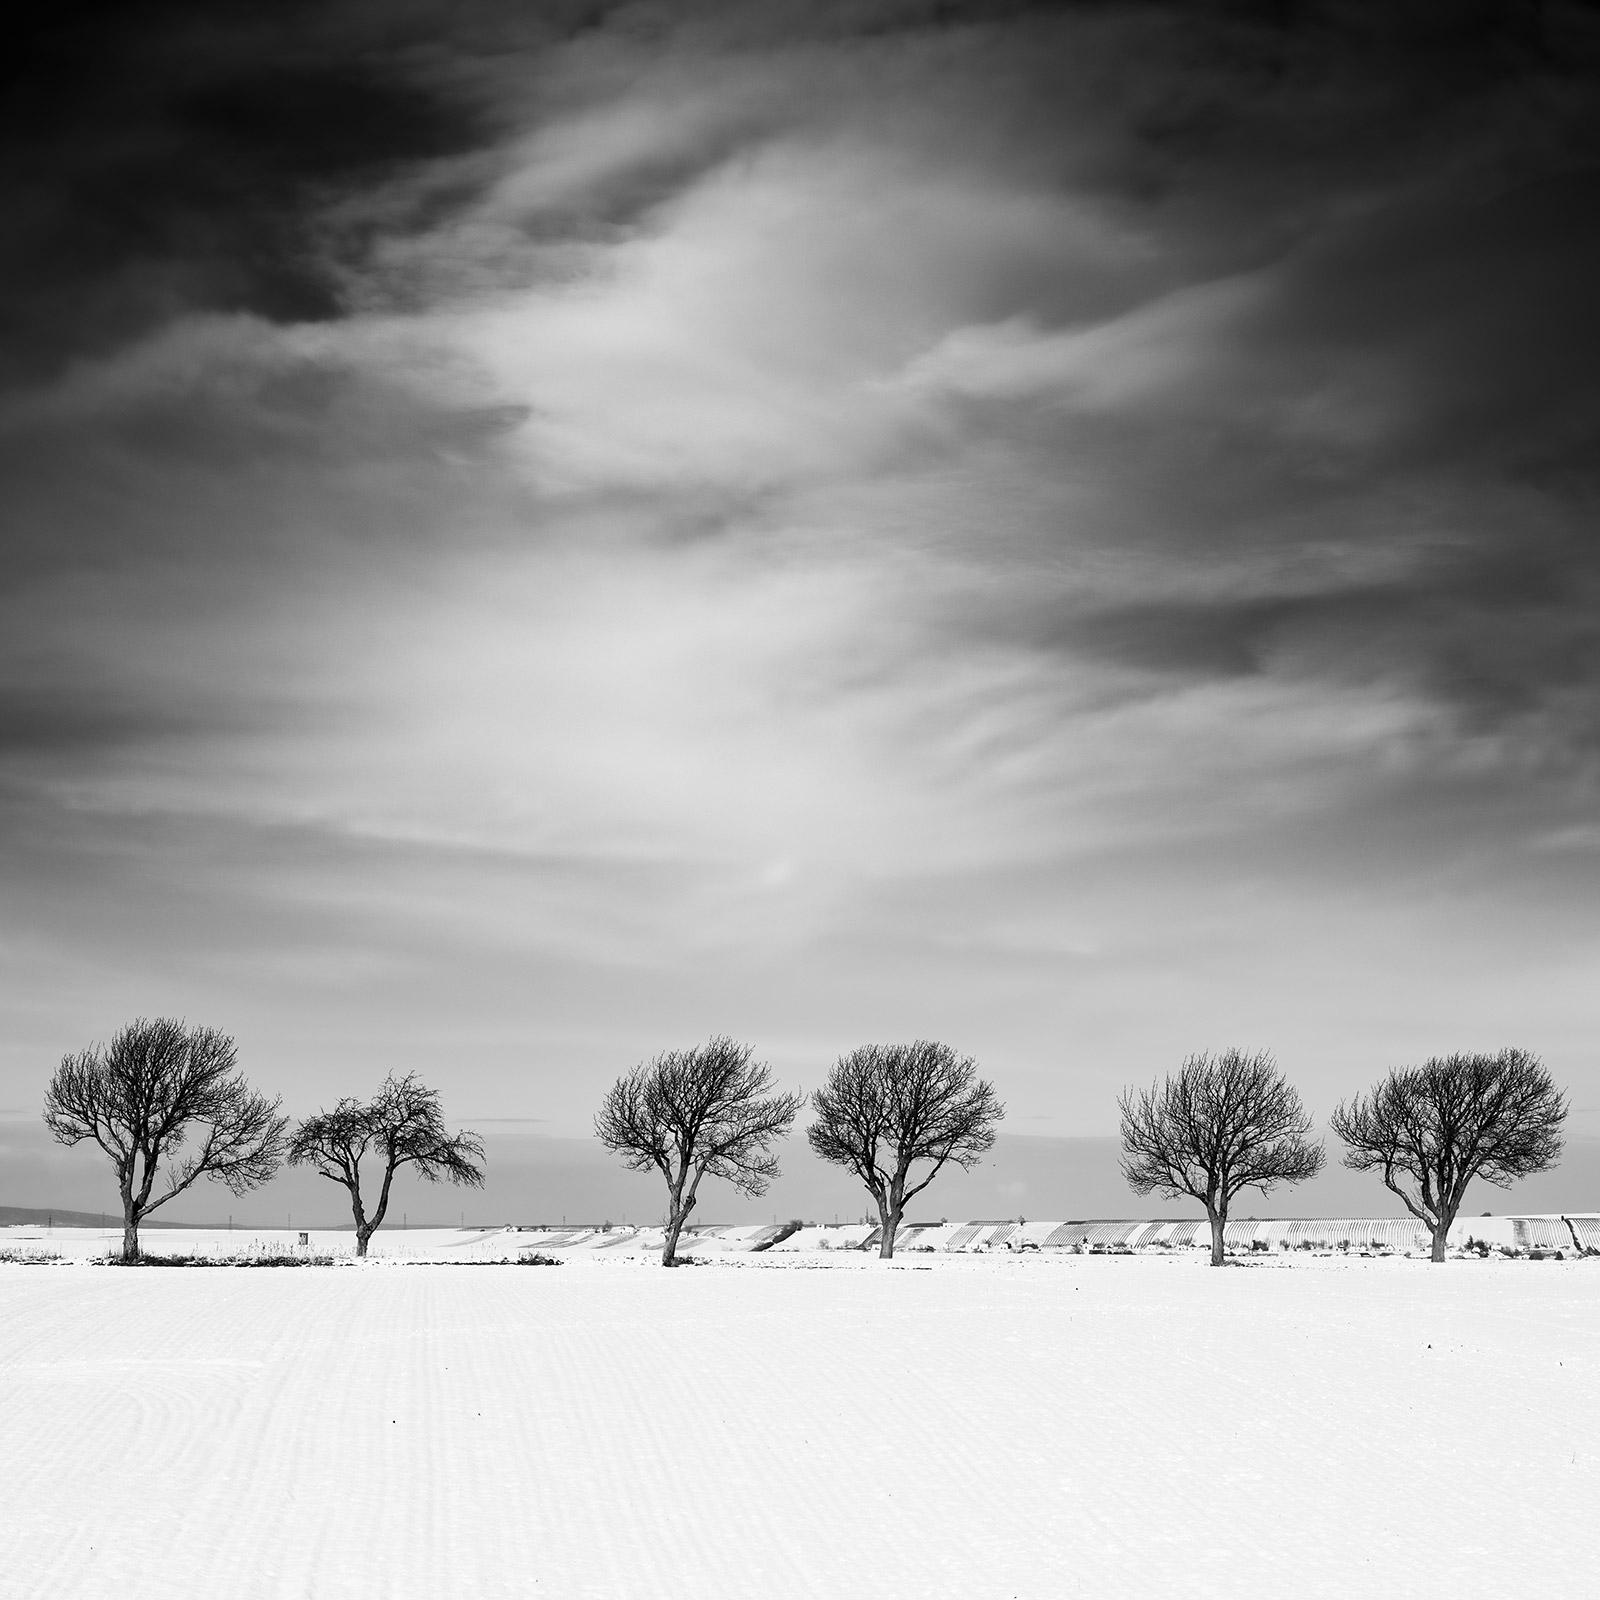 Gerald Berghammer Landscape Photograph - Cherry Tree Avenue, Winter, snowy Field, black and white landscape photography